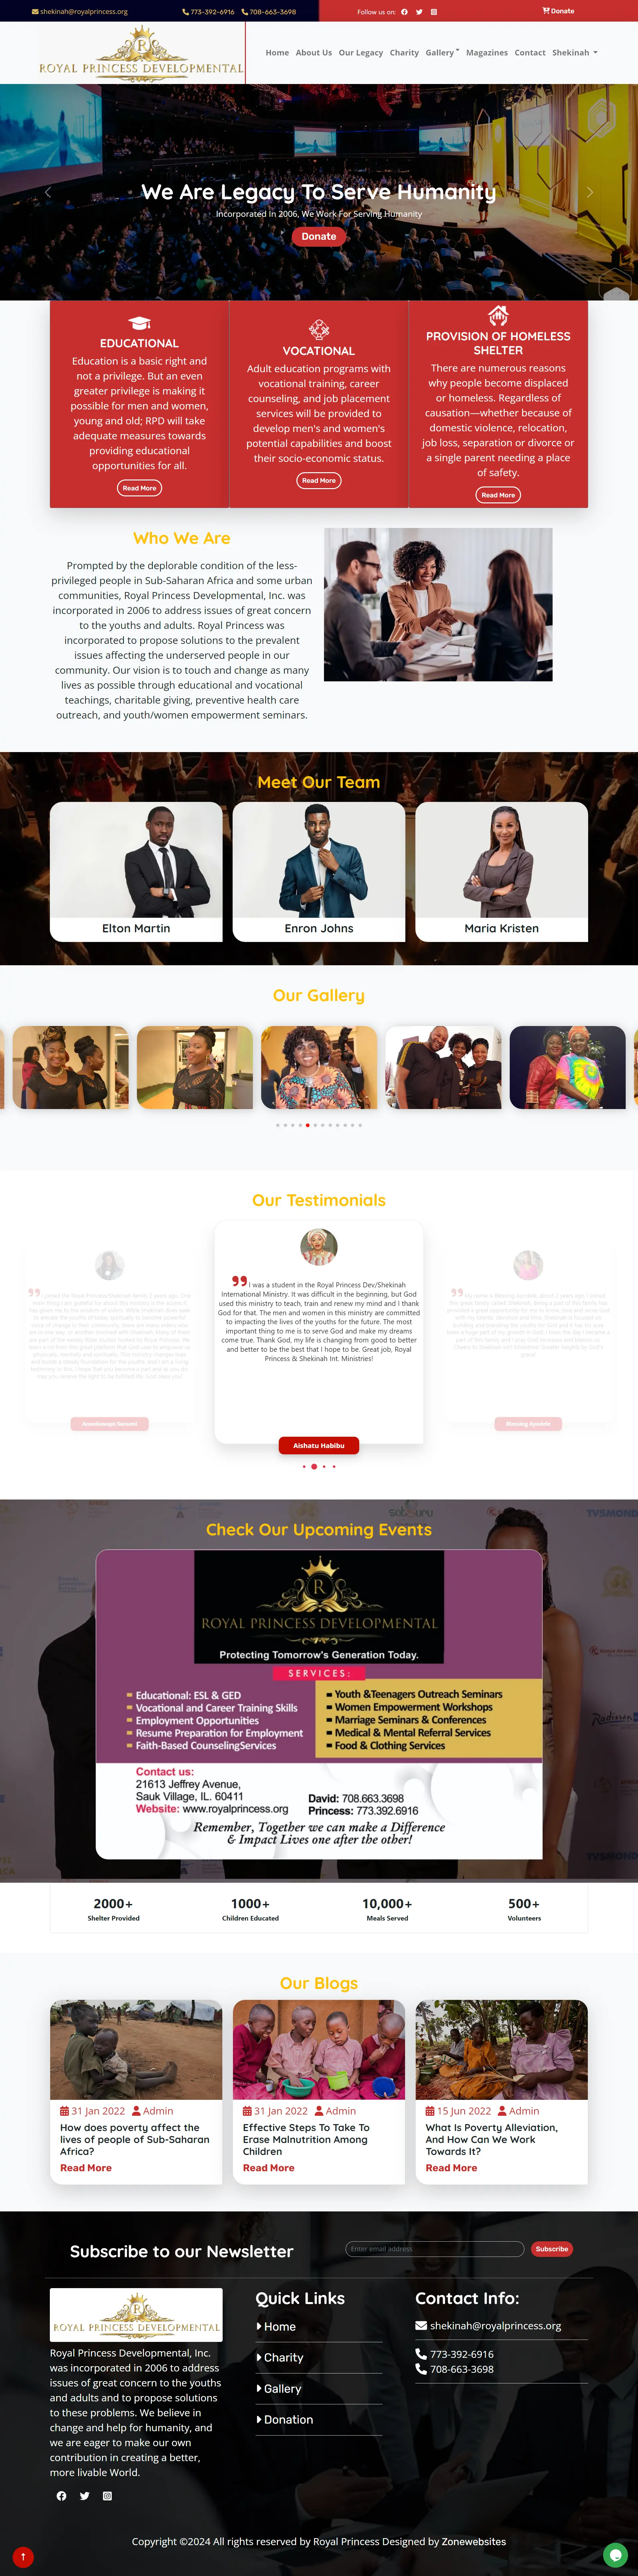 Charity and Donation Organization Website Design